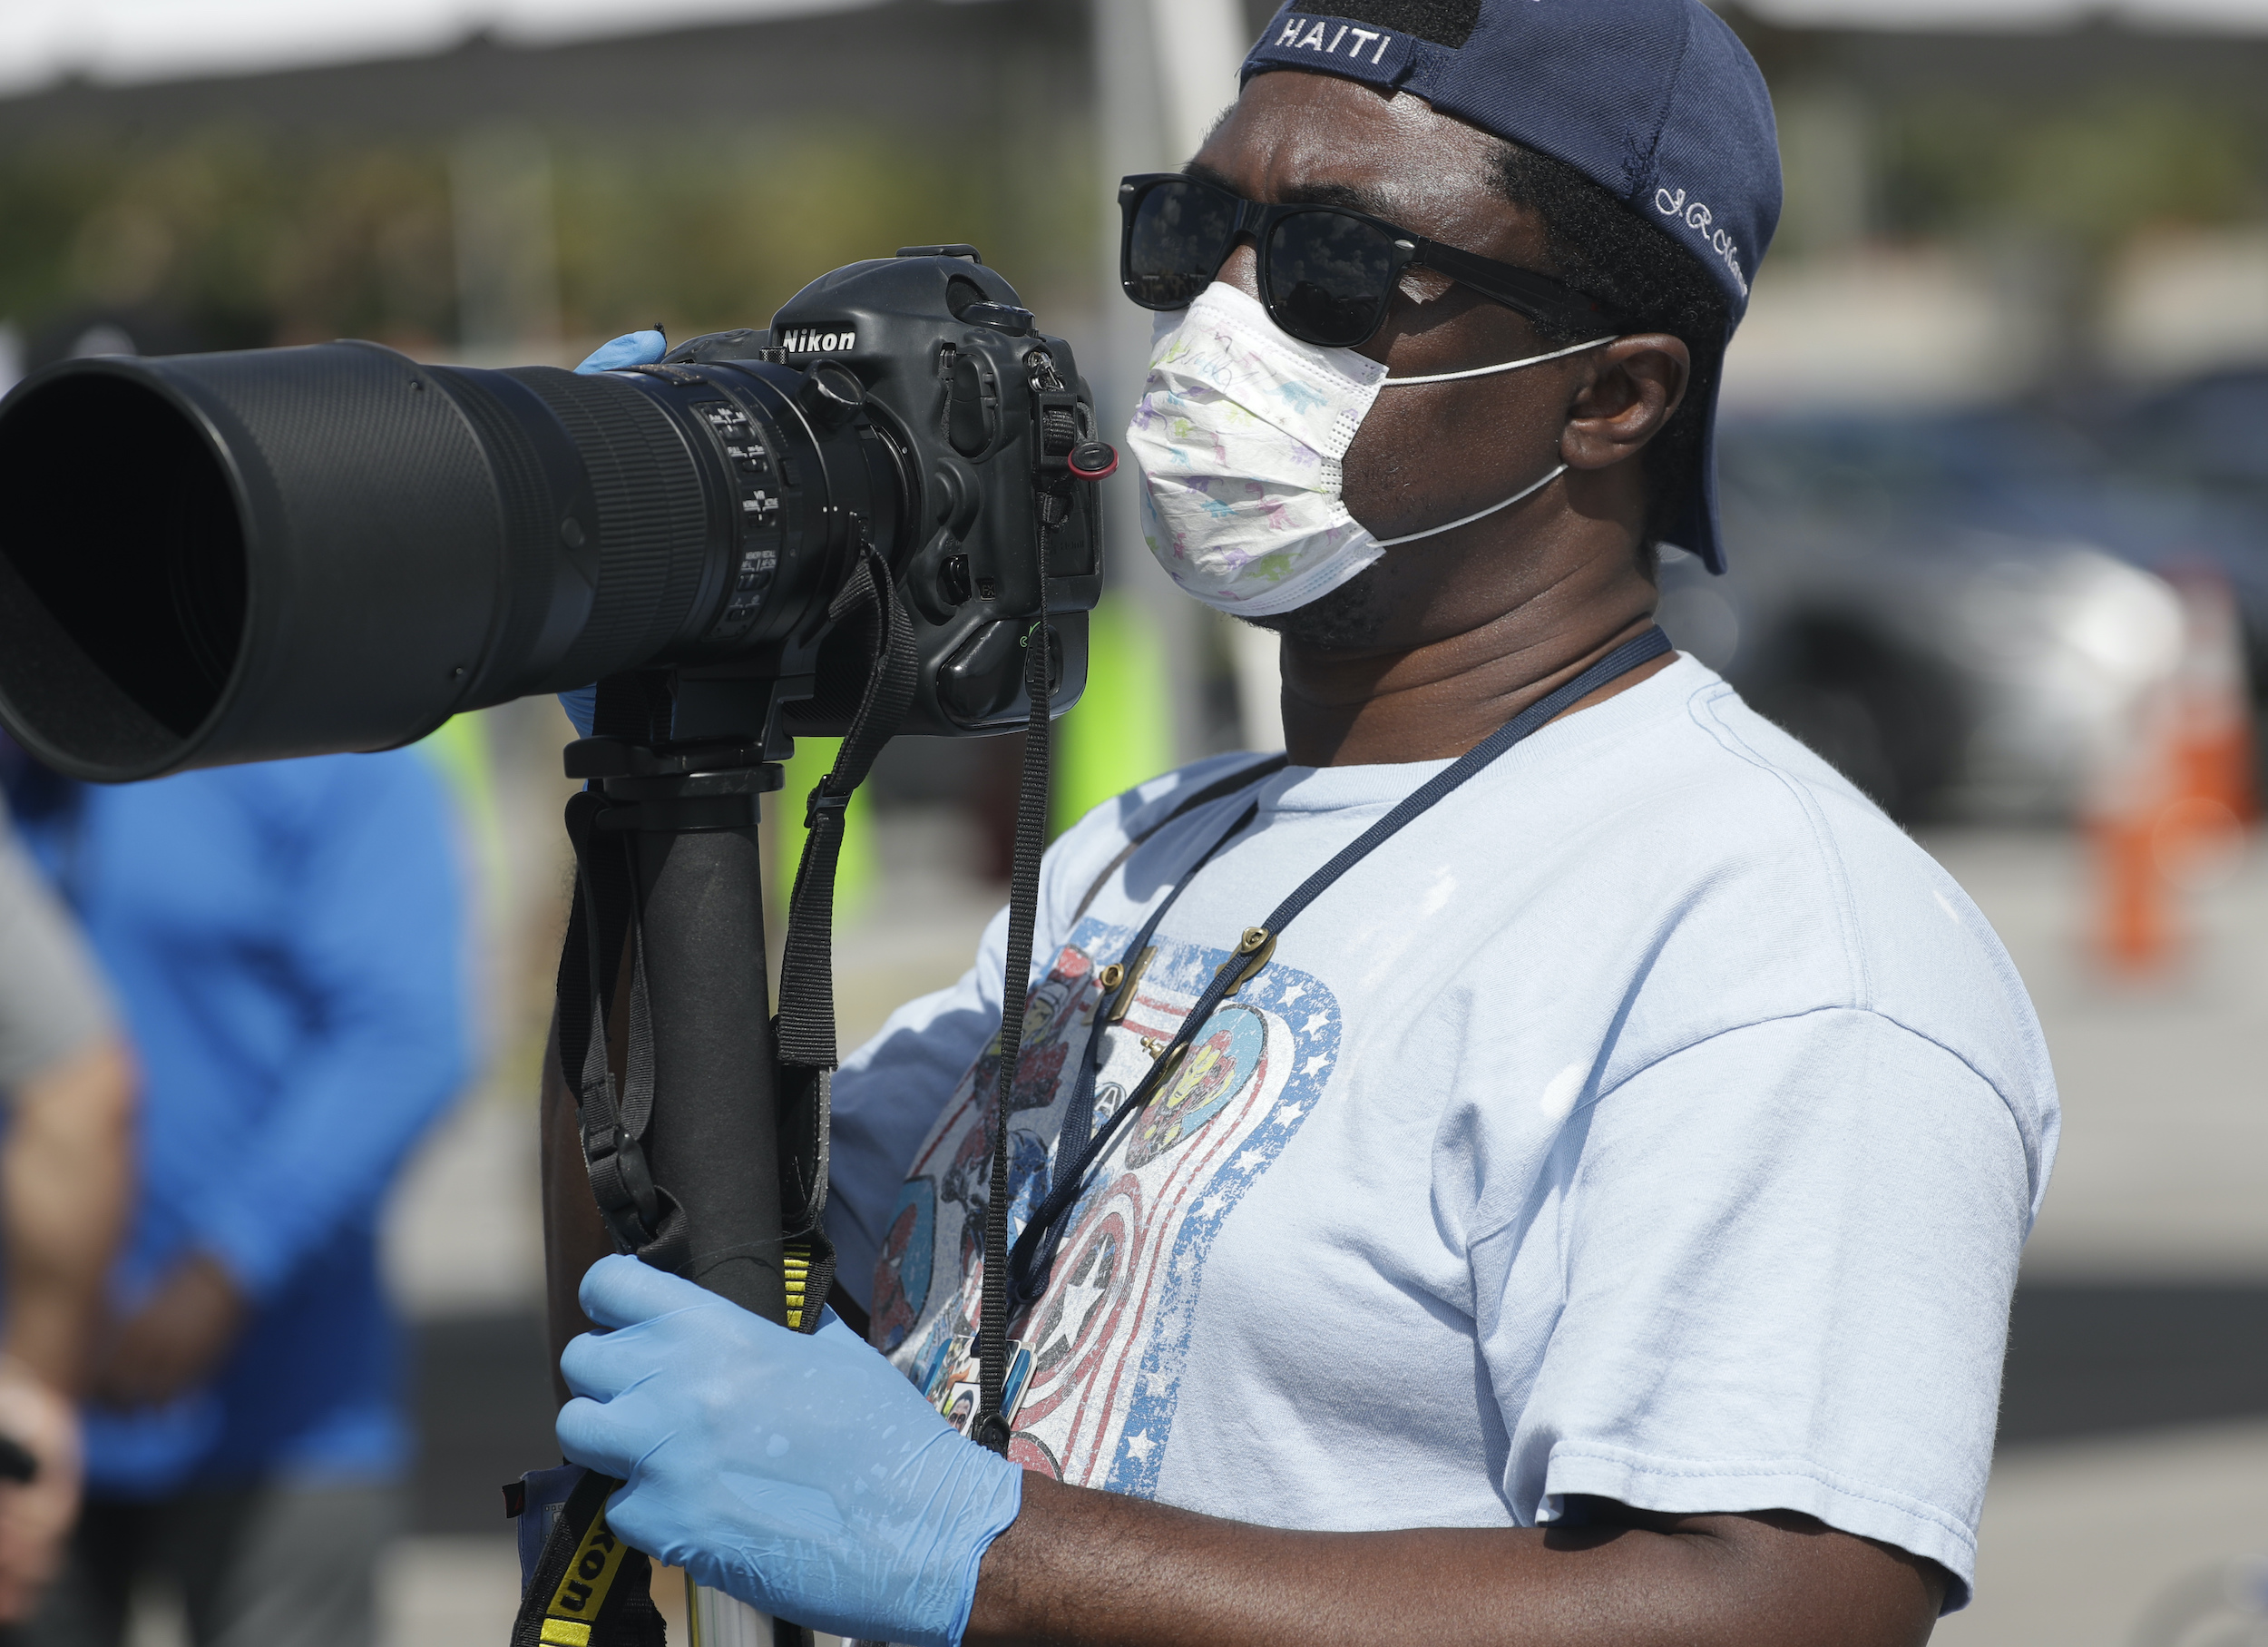 In A Pandemic Many Photojournalists Face An Impossible Choice Stay Safe Or Get Out There To Pay The Bills Poynter